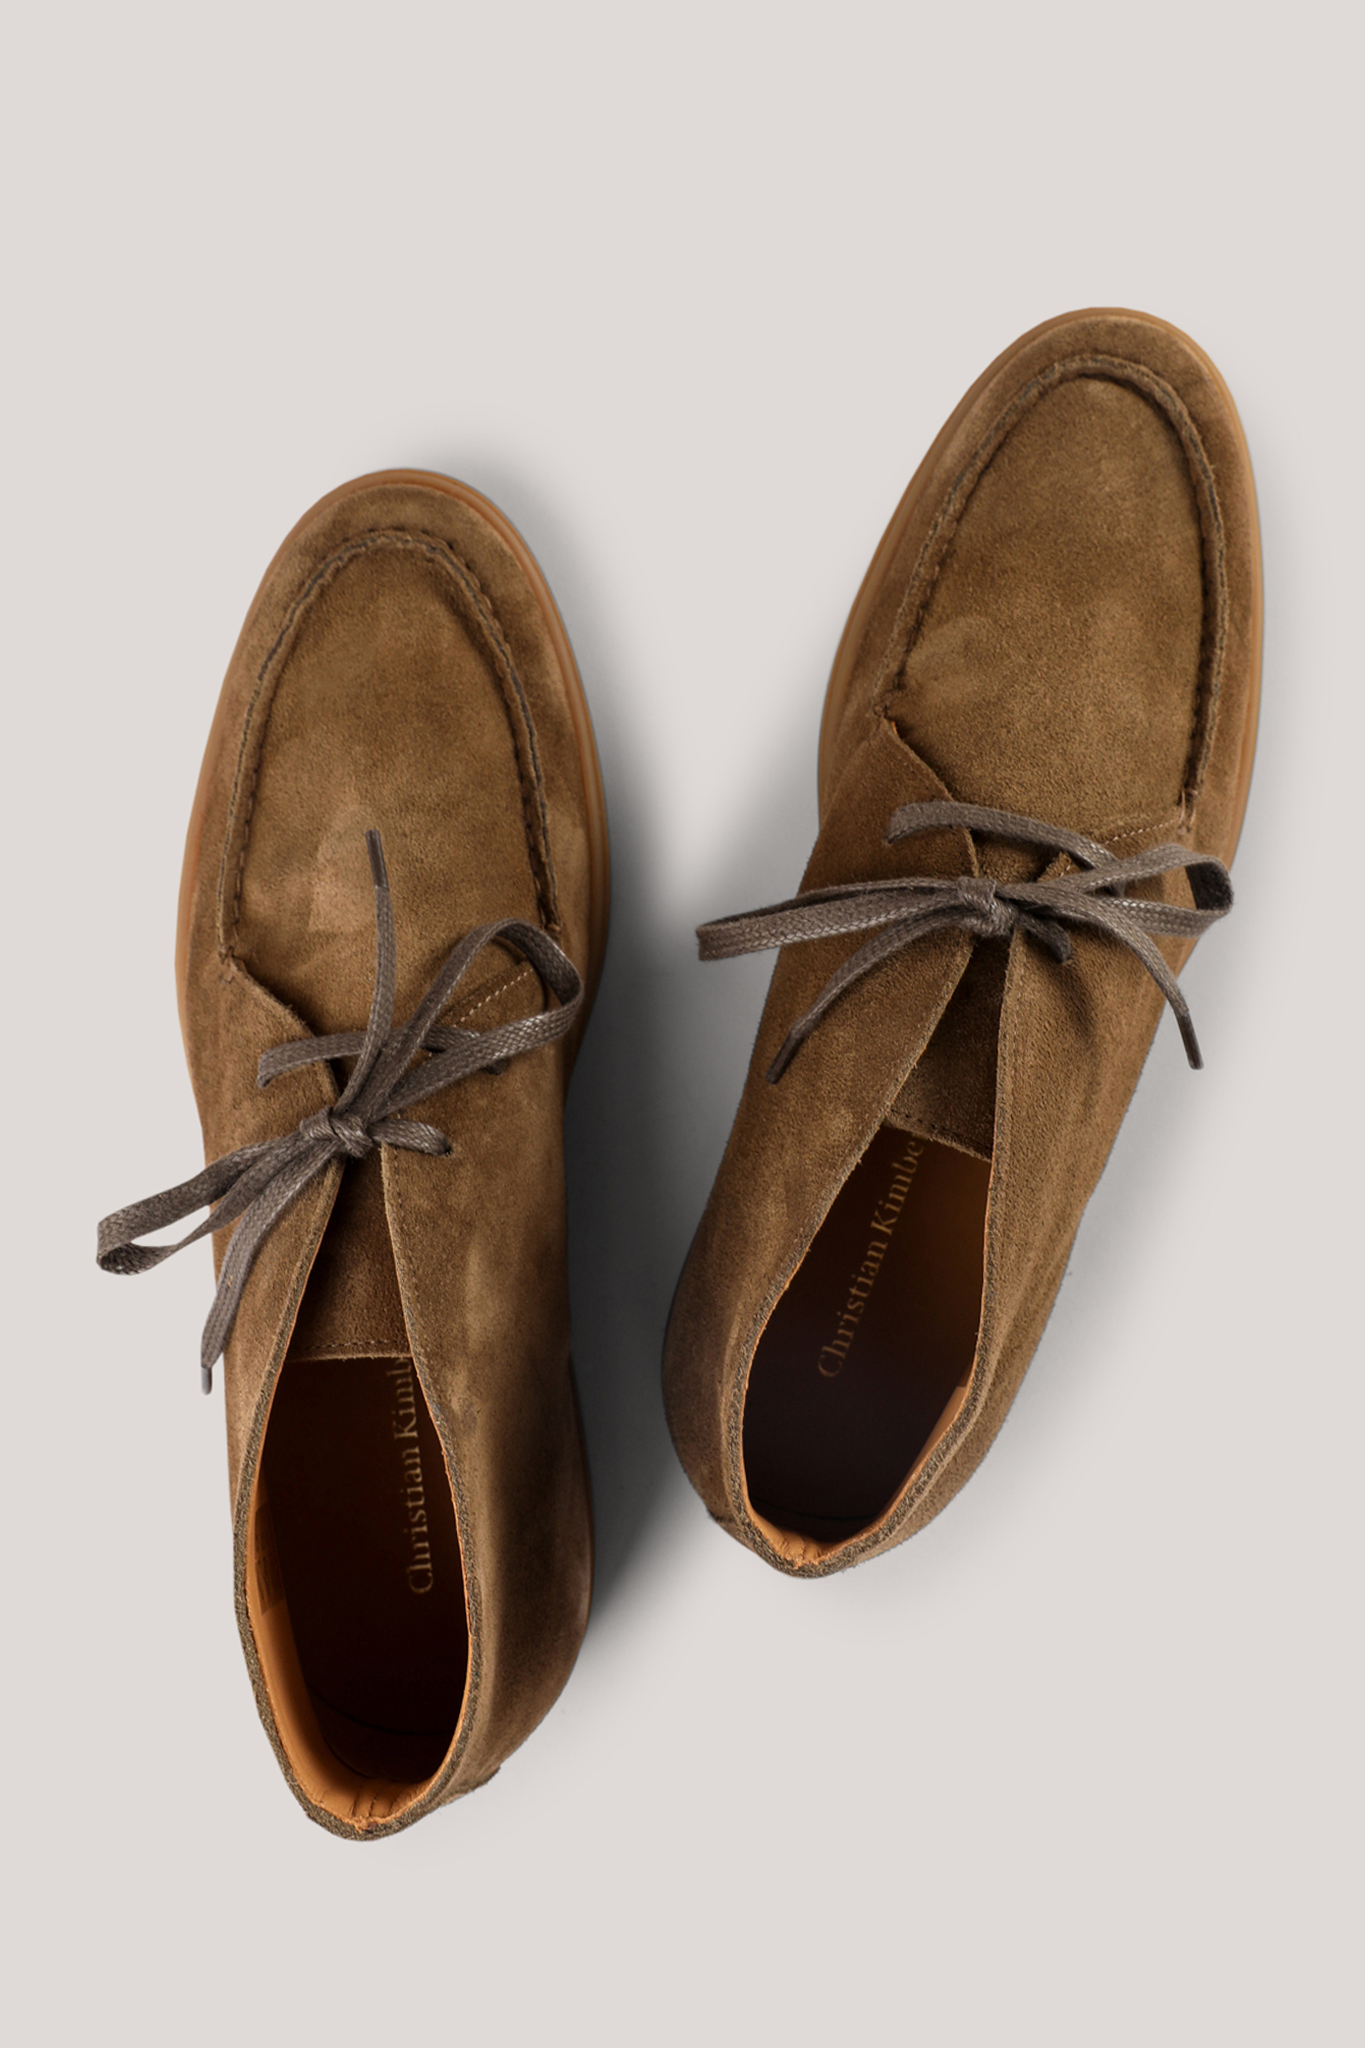 Armadale Leather Desert Boots - Dusty Olive